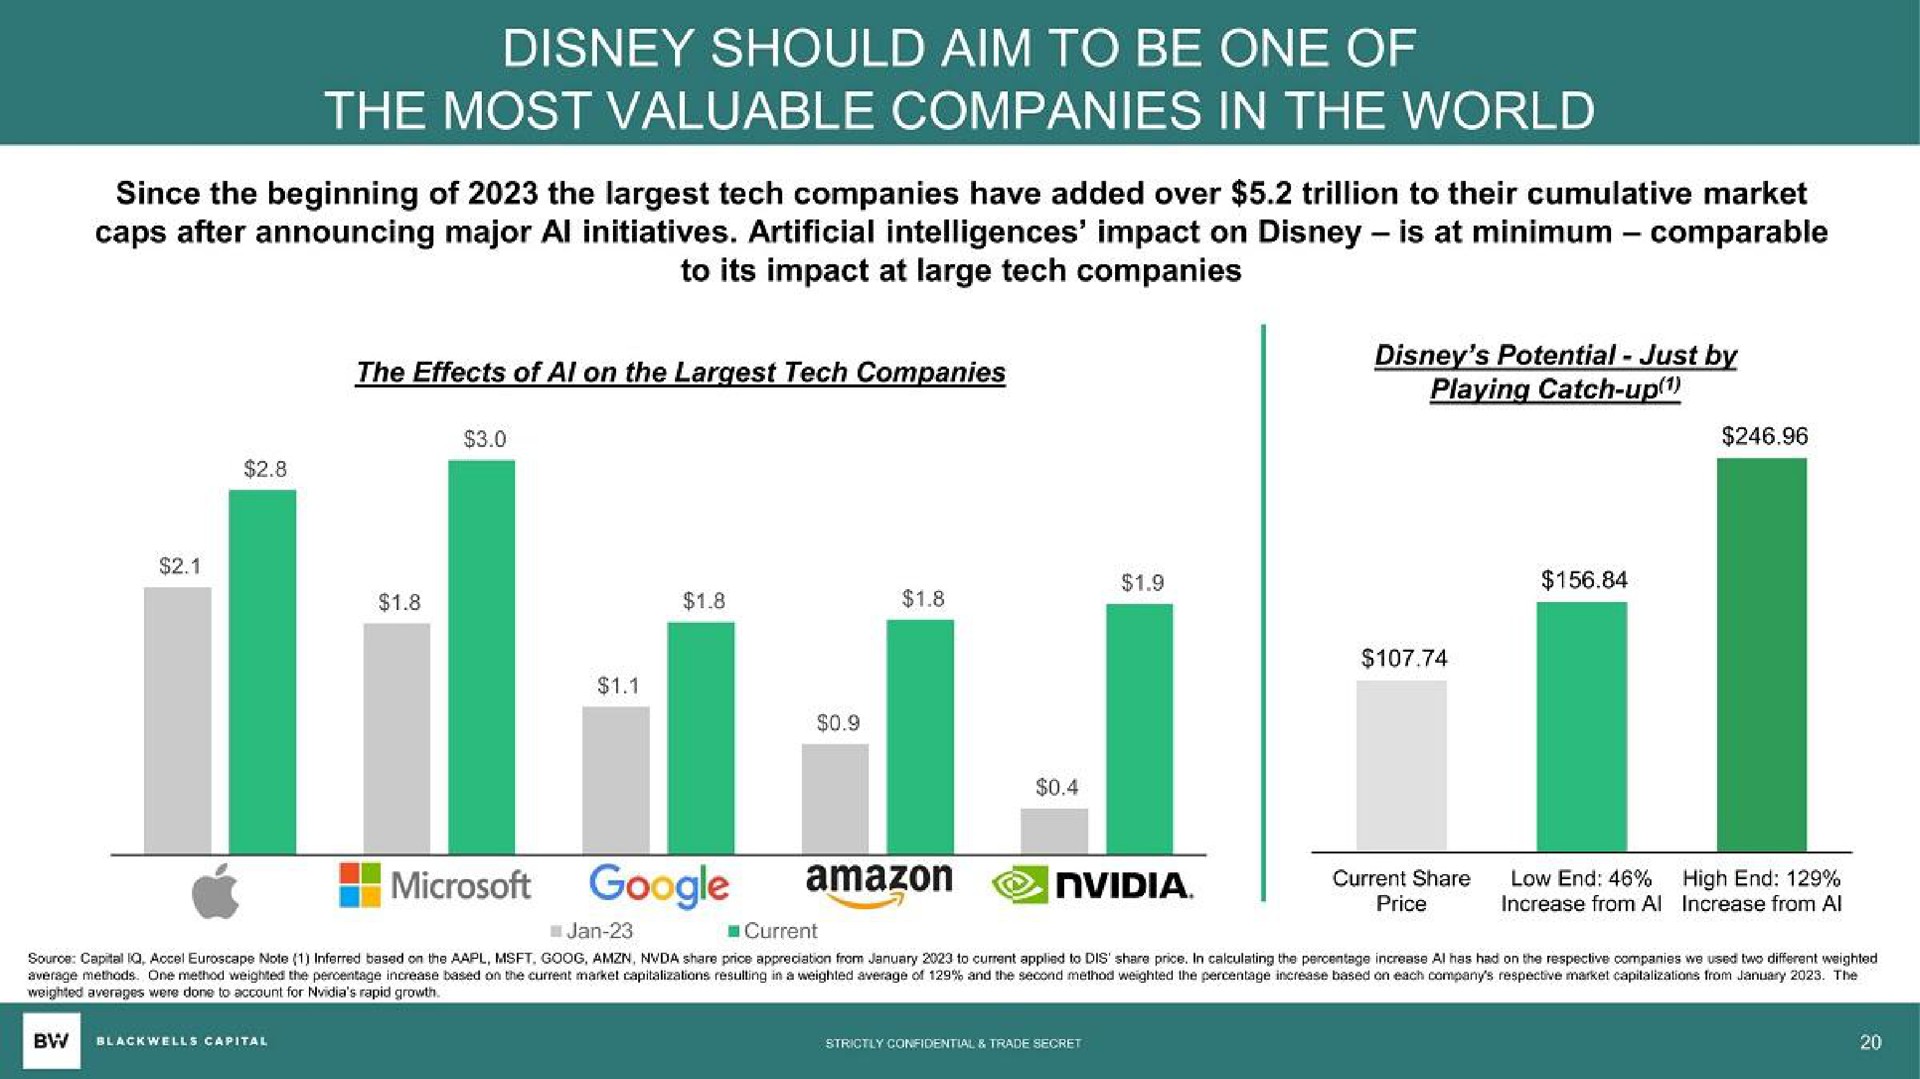 should aim to be one of the most valuable companies in the world | Blackwells Capital